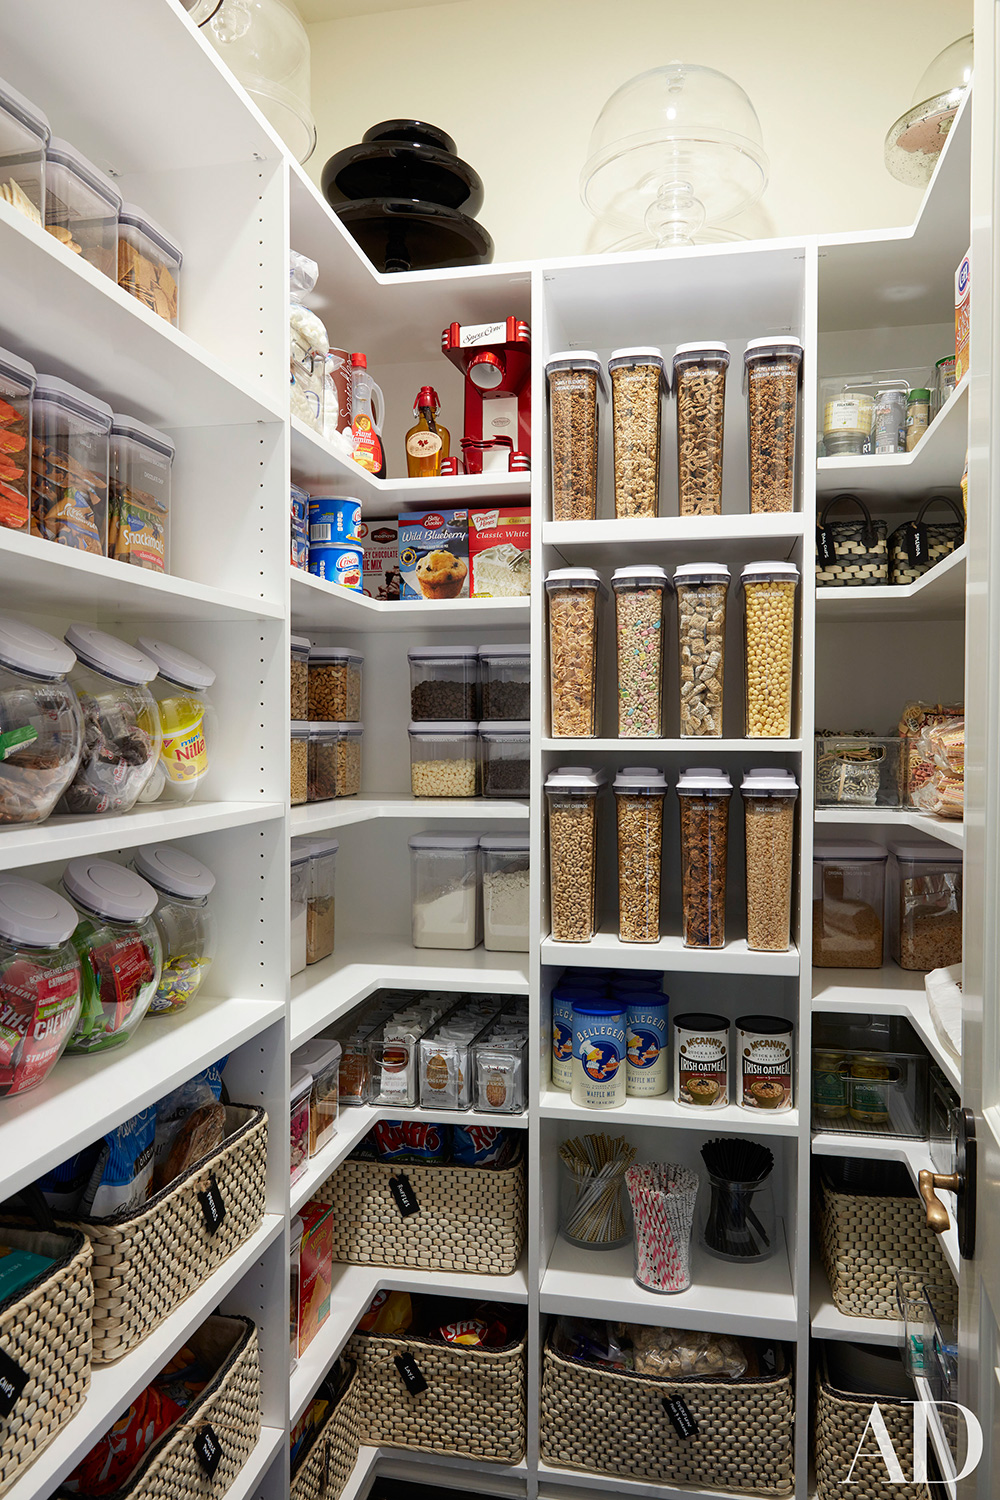 Khloe's pantry demonstrates why she is the Queen of Organization.